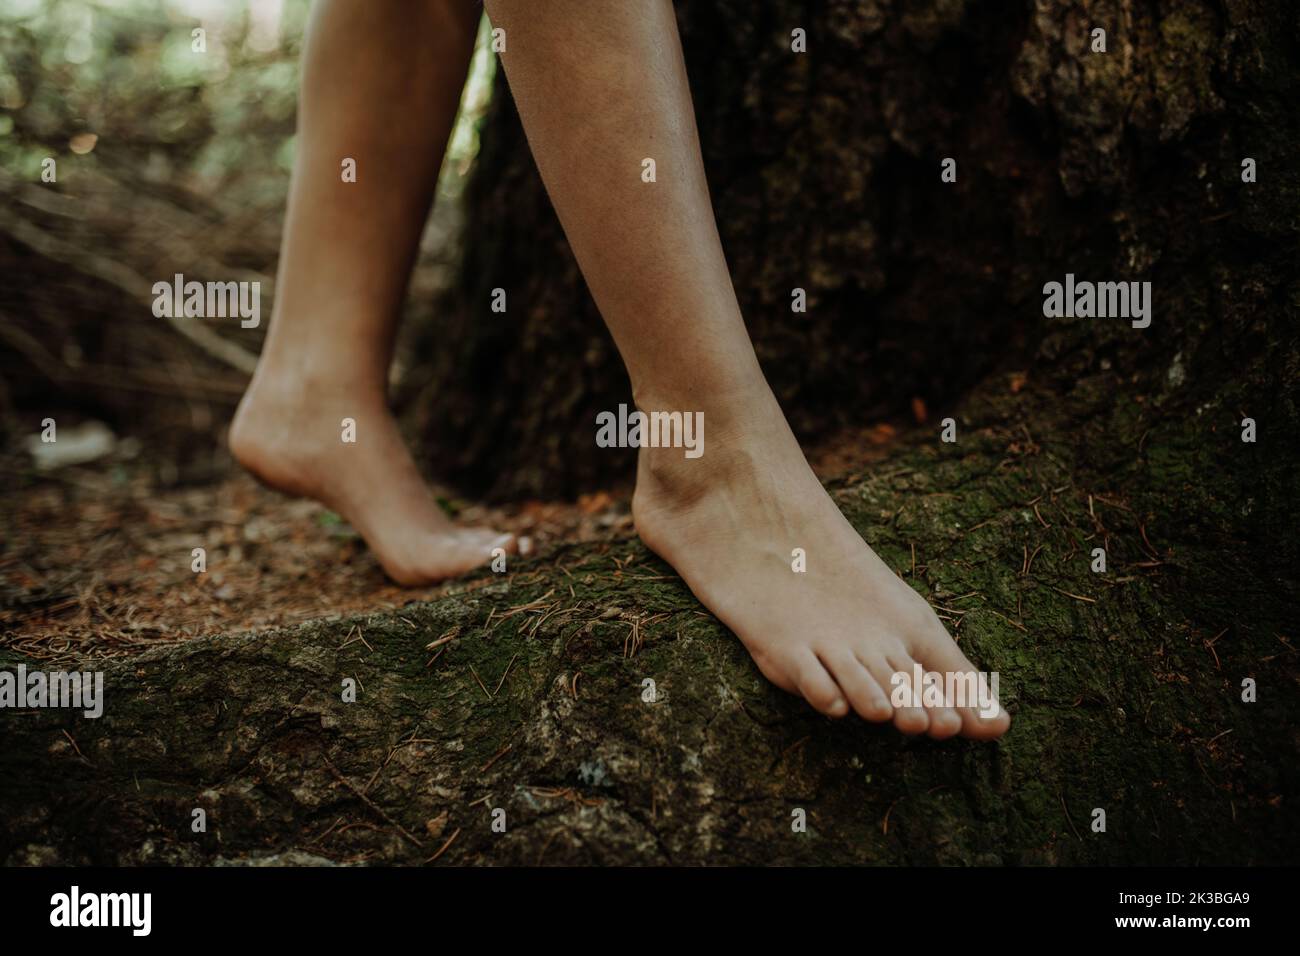 Close-up of barefoot legs walking in nature. Concept of healthy feet. Stock Photo